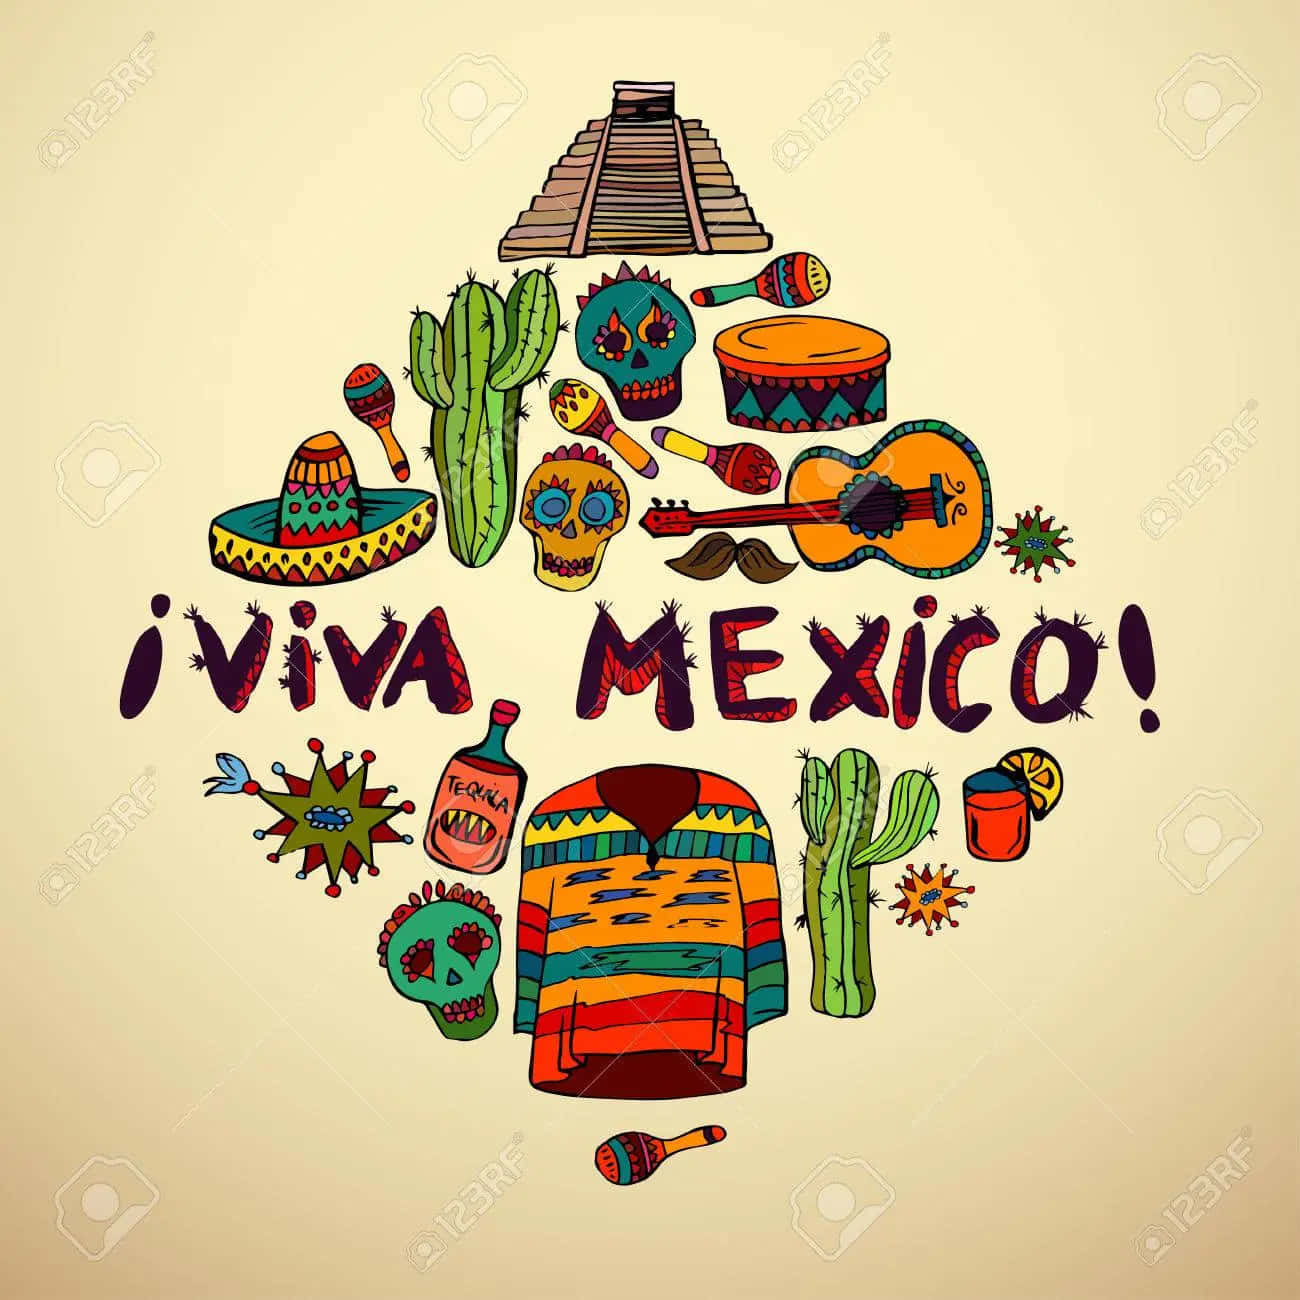 Viva Mexico! Celebrate The Culture, Heritage And Spirit Of This Beautiful Nation.